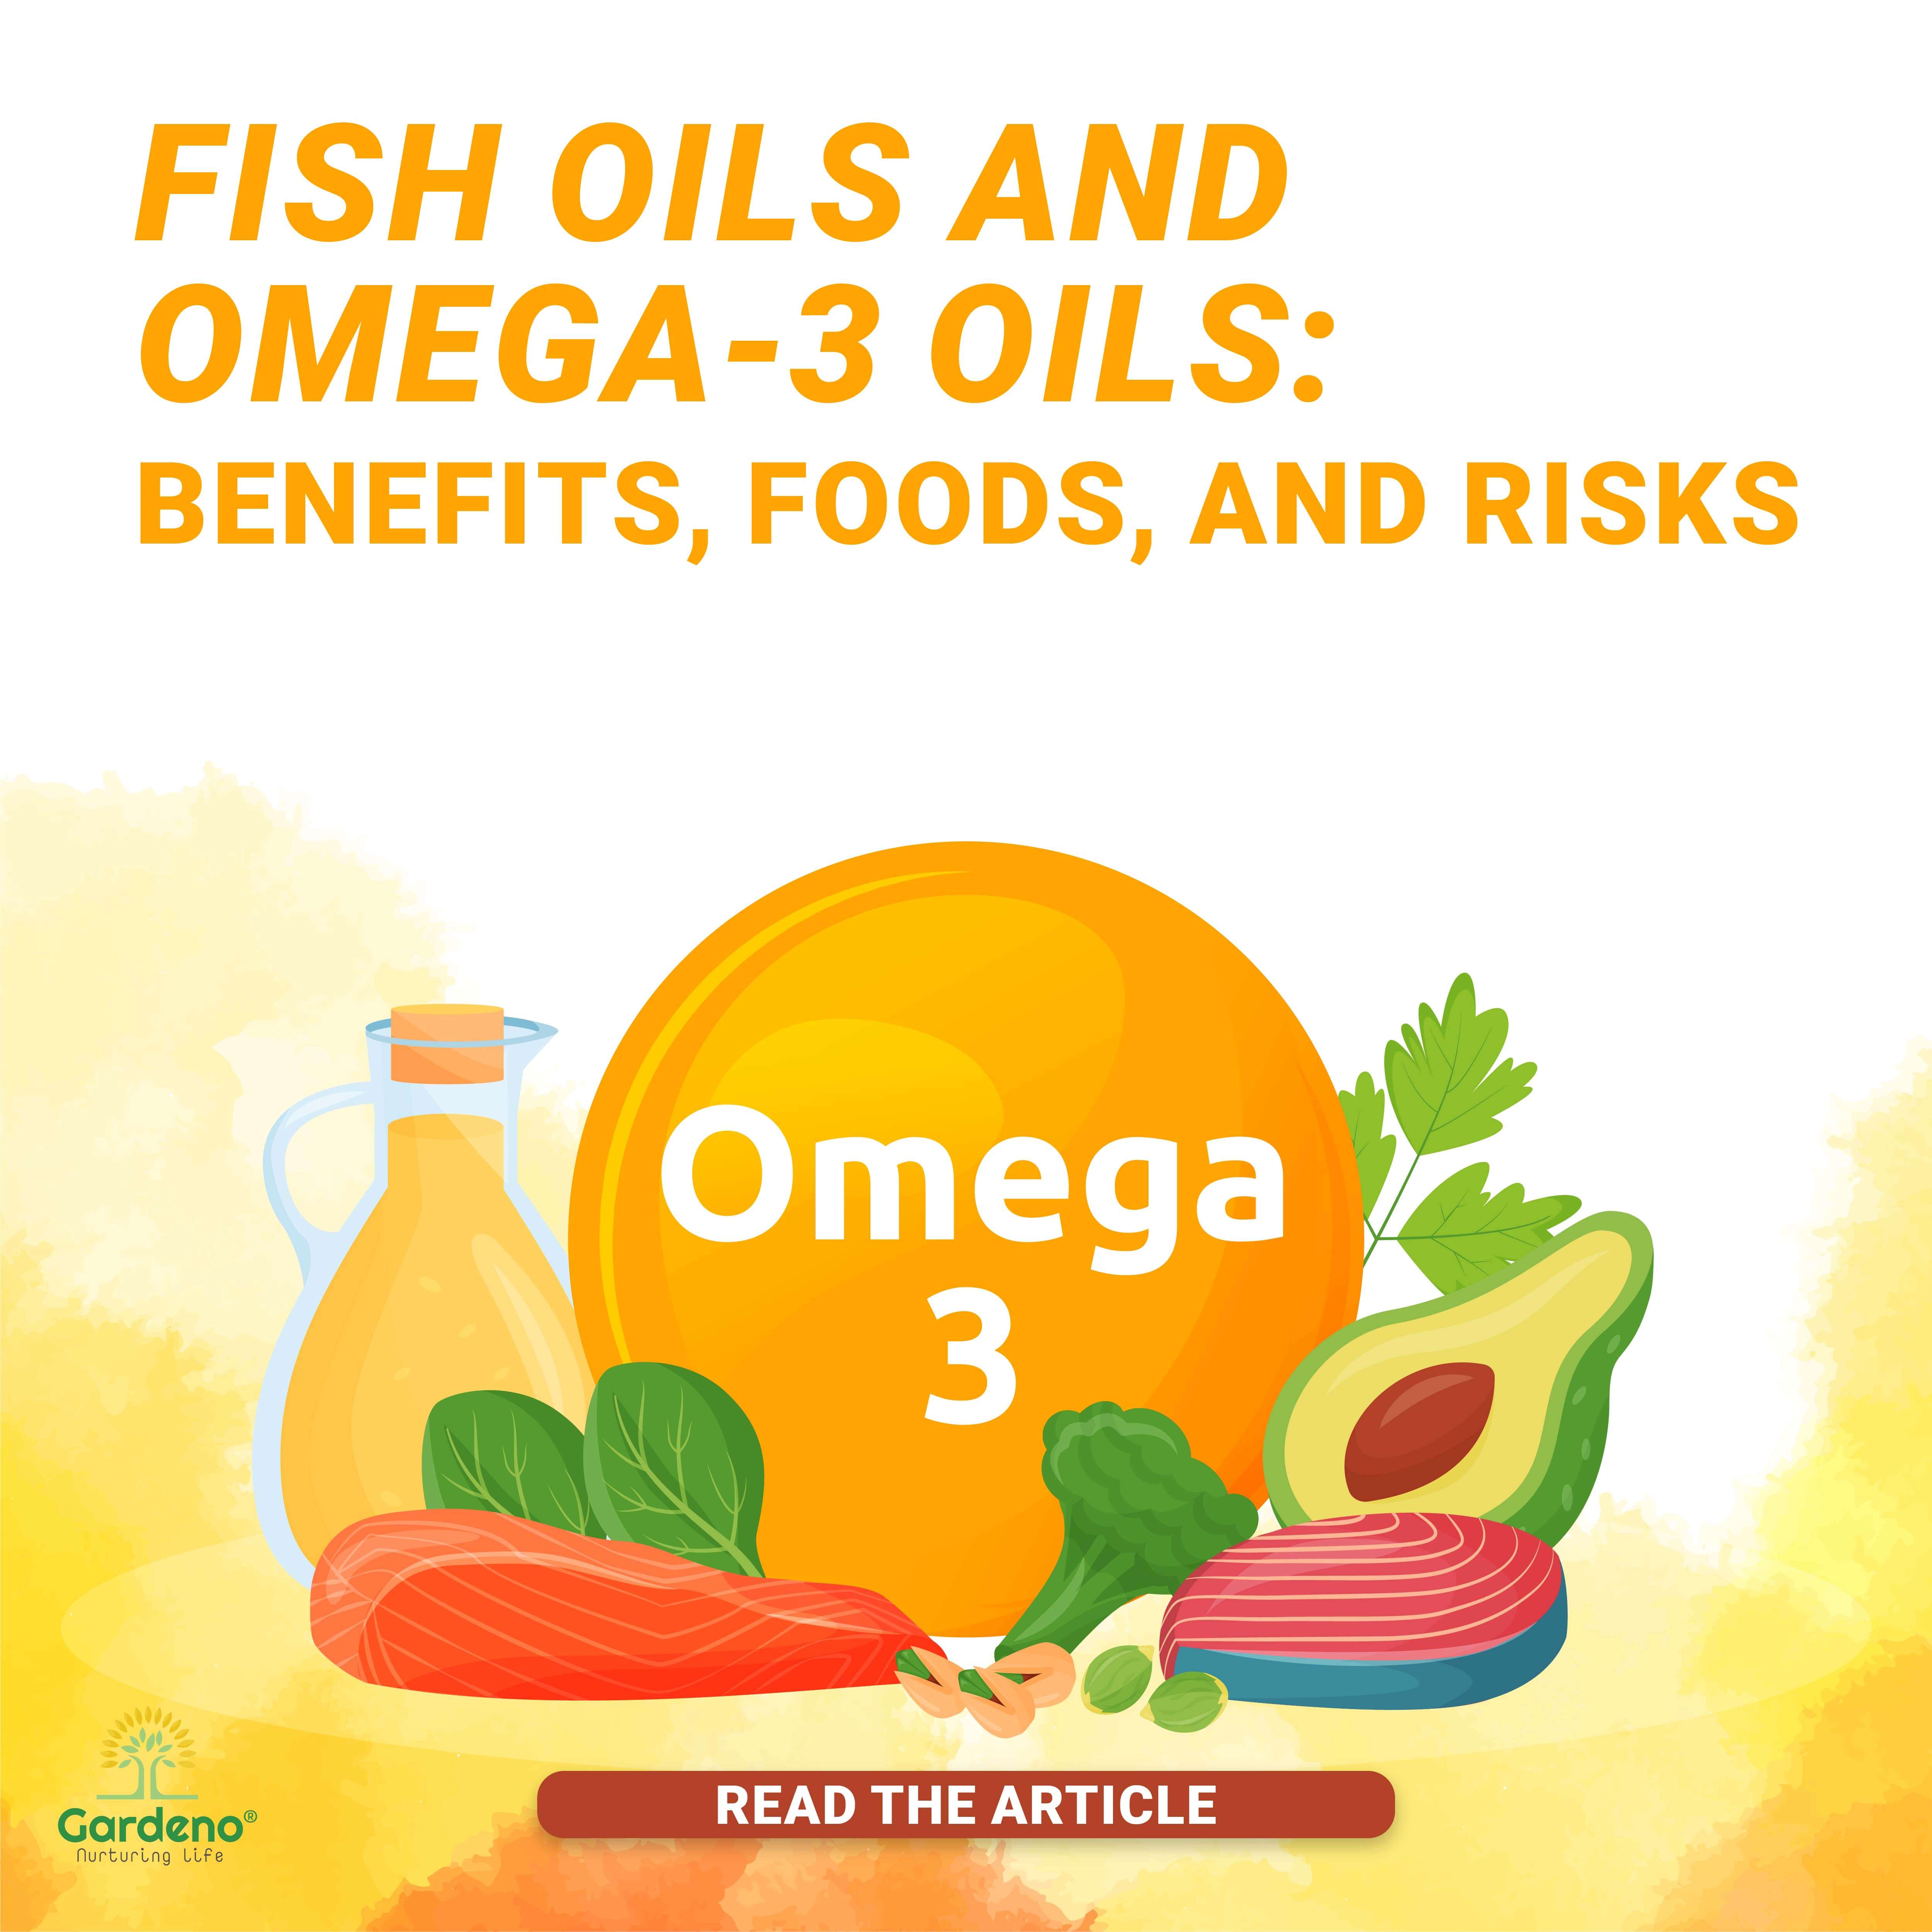 Fish Oil and Omega-3 Oils: Benefits, Food, And Risks